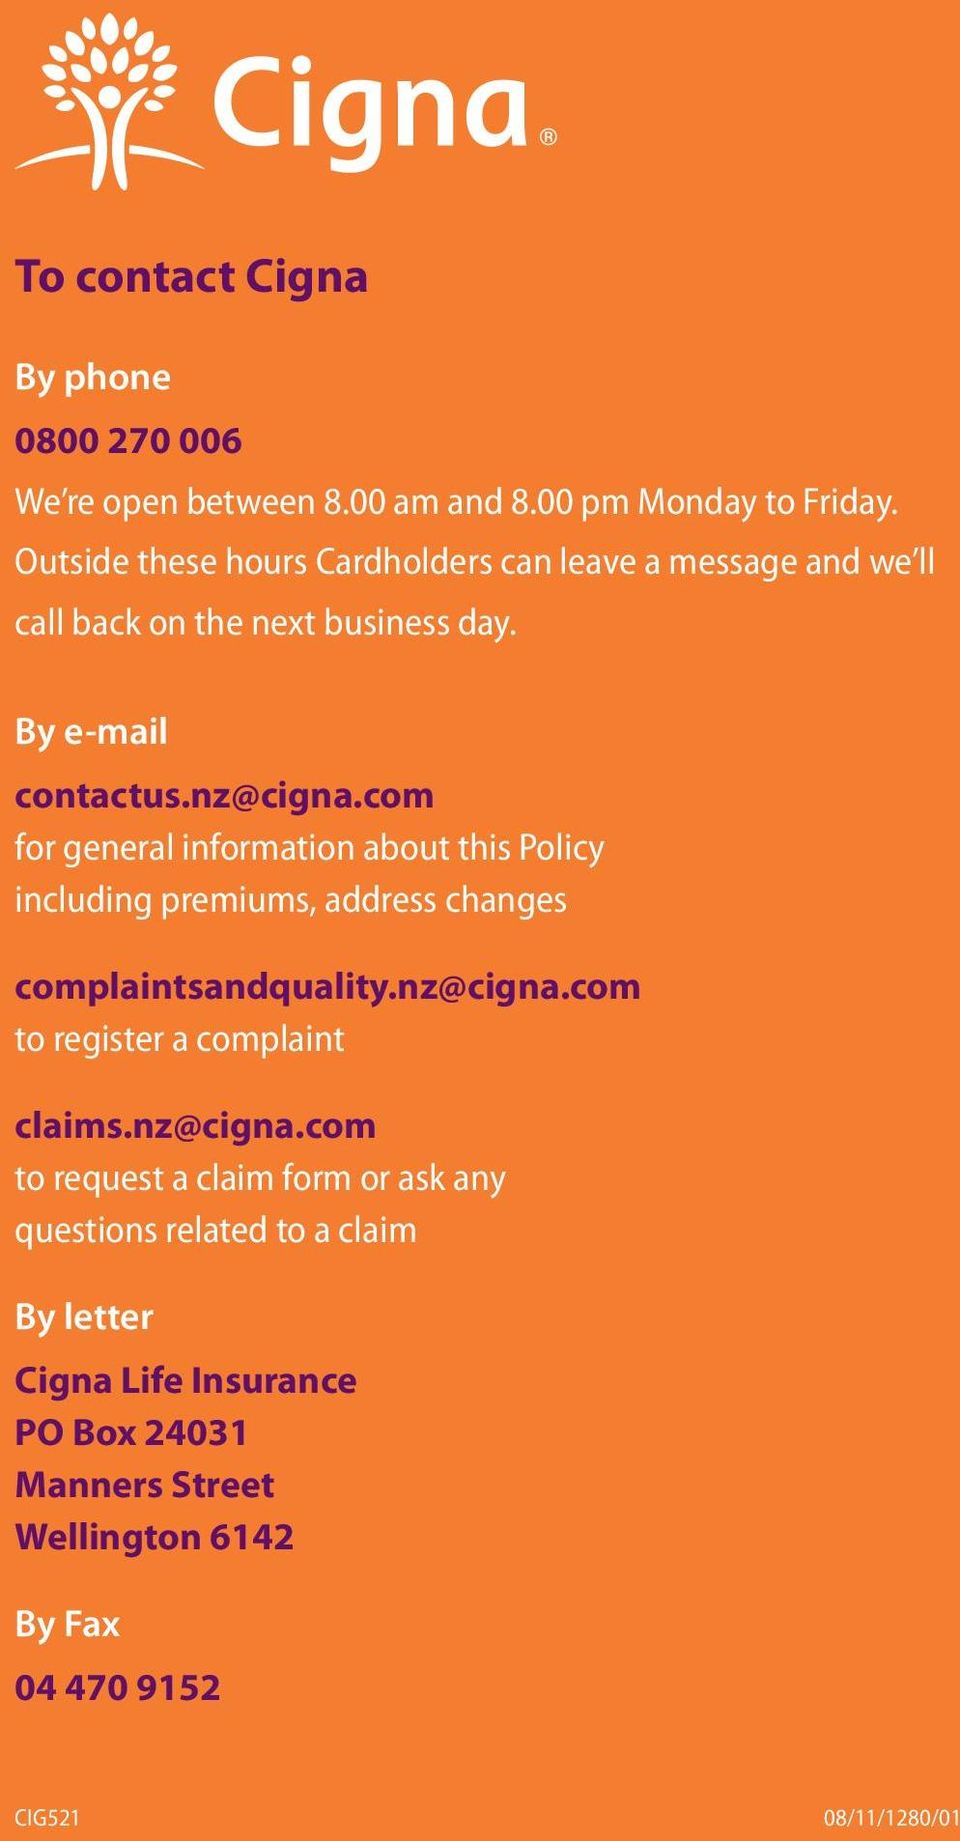 com for general information about this Policy including premiums, address changes complaintsandquality.nz@cigna.